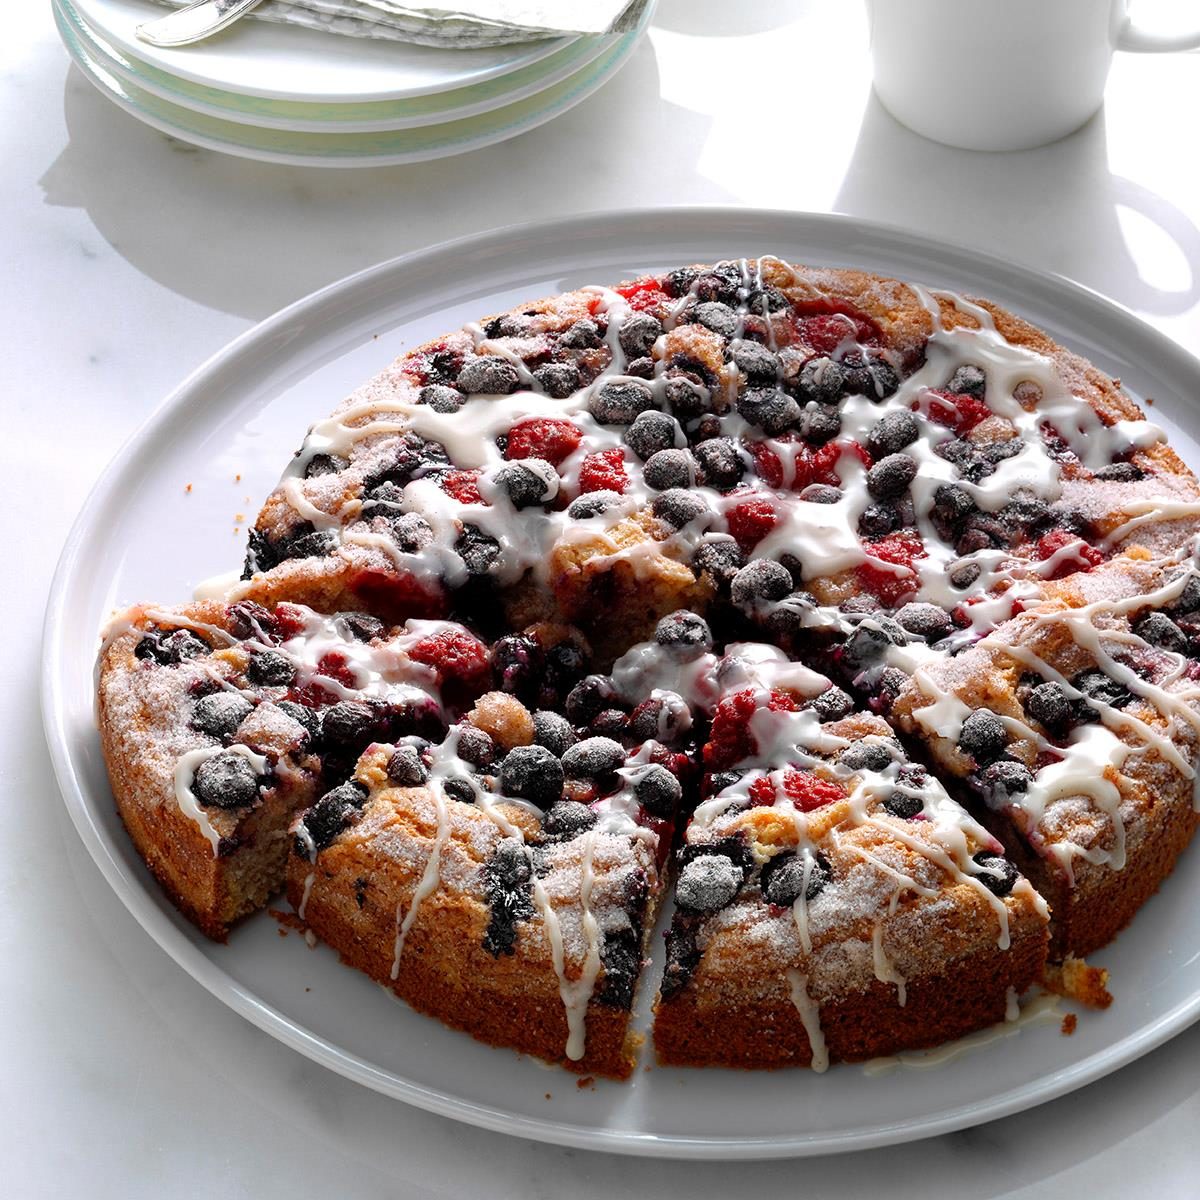 https://www.tasteofhome.com/wp-content/uploads/2017/09/Berry-Topped-Coffee-Cake_EXPS_HCK17_104568_B08_24_5b.jpg